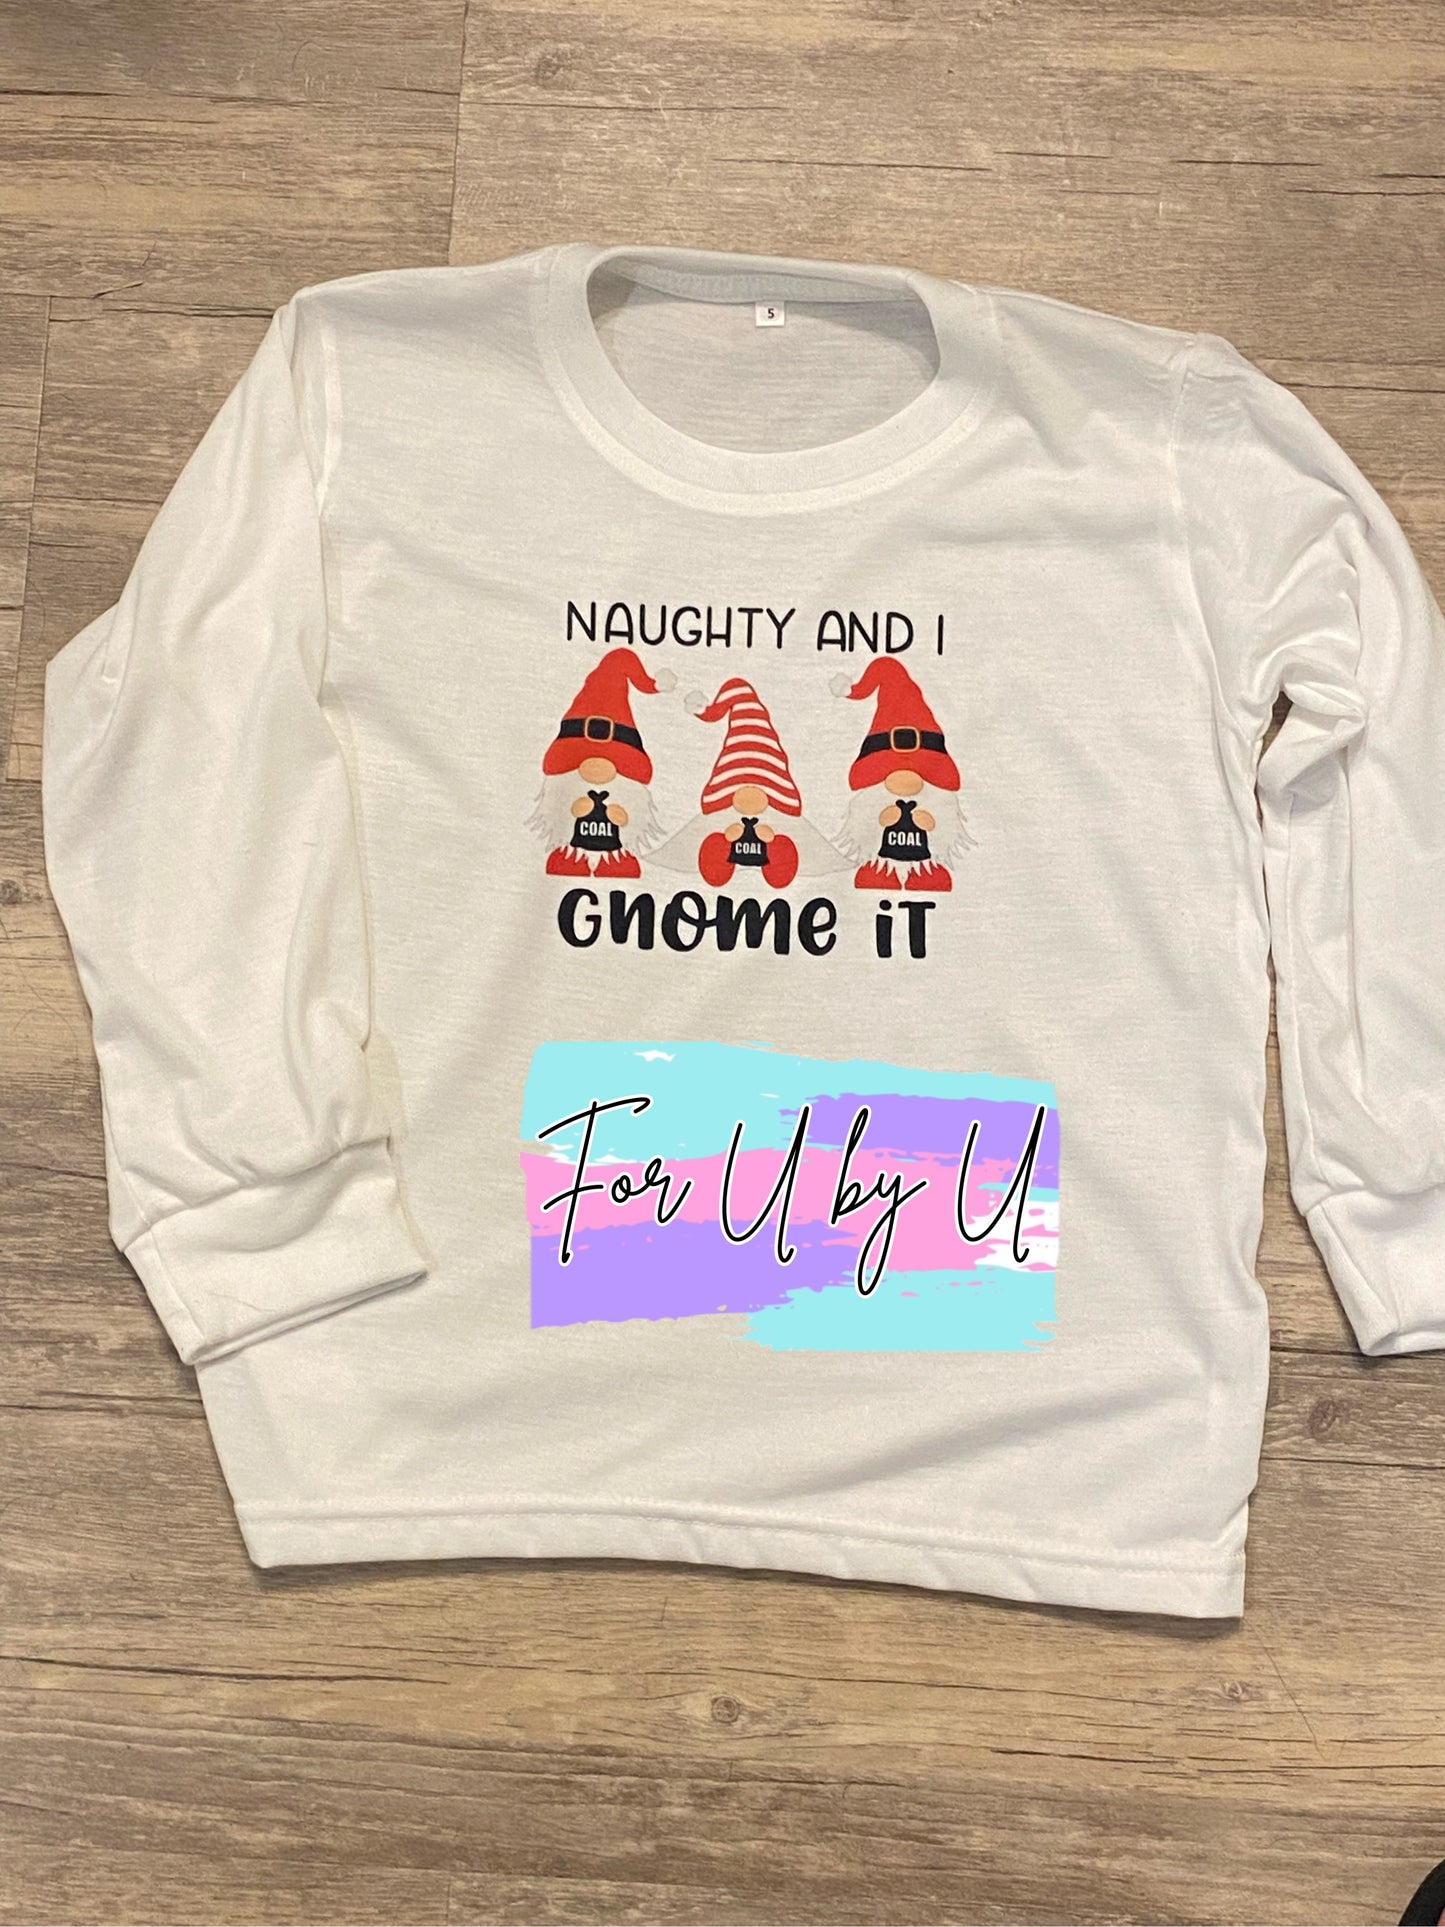 Naughty and I Gnome it Shirt